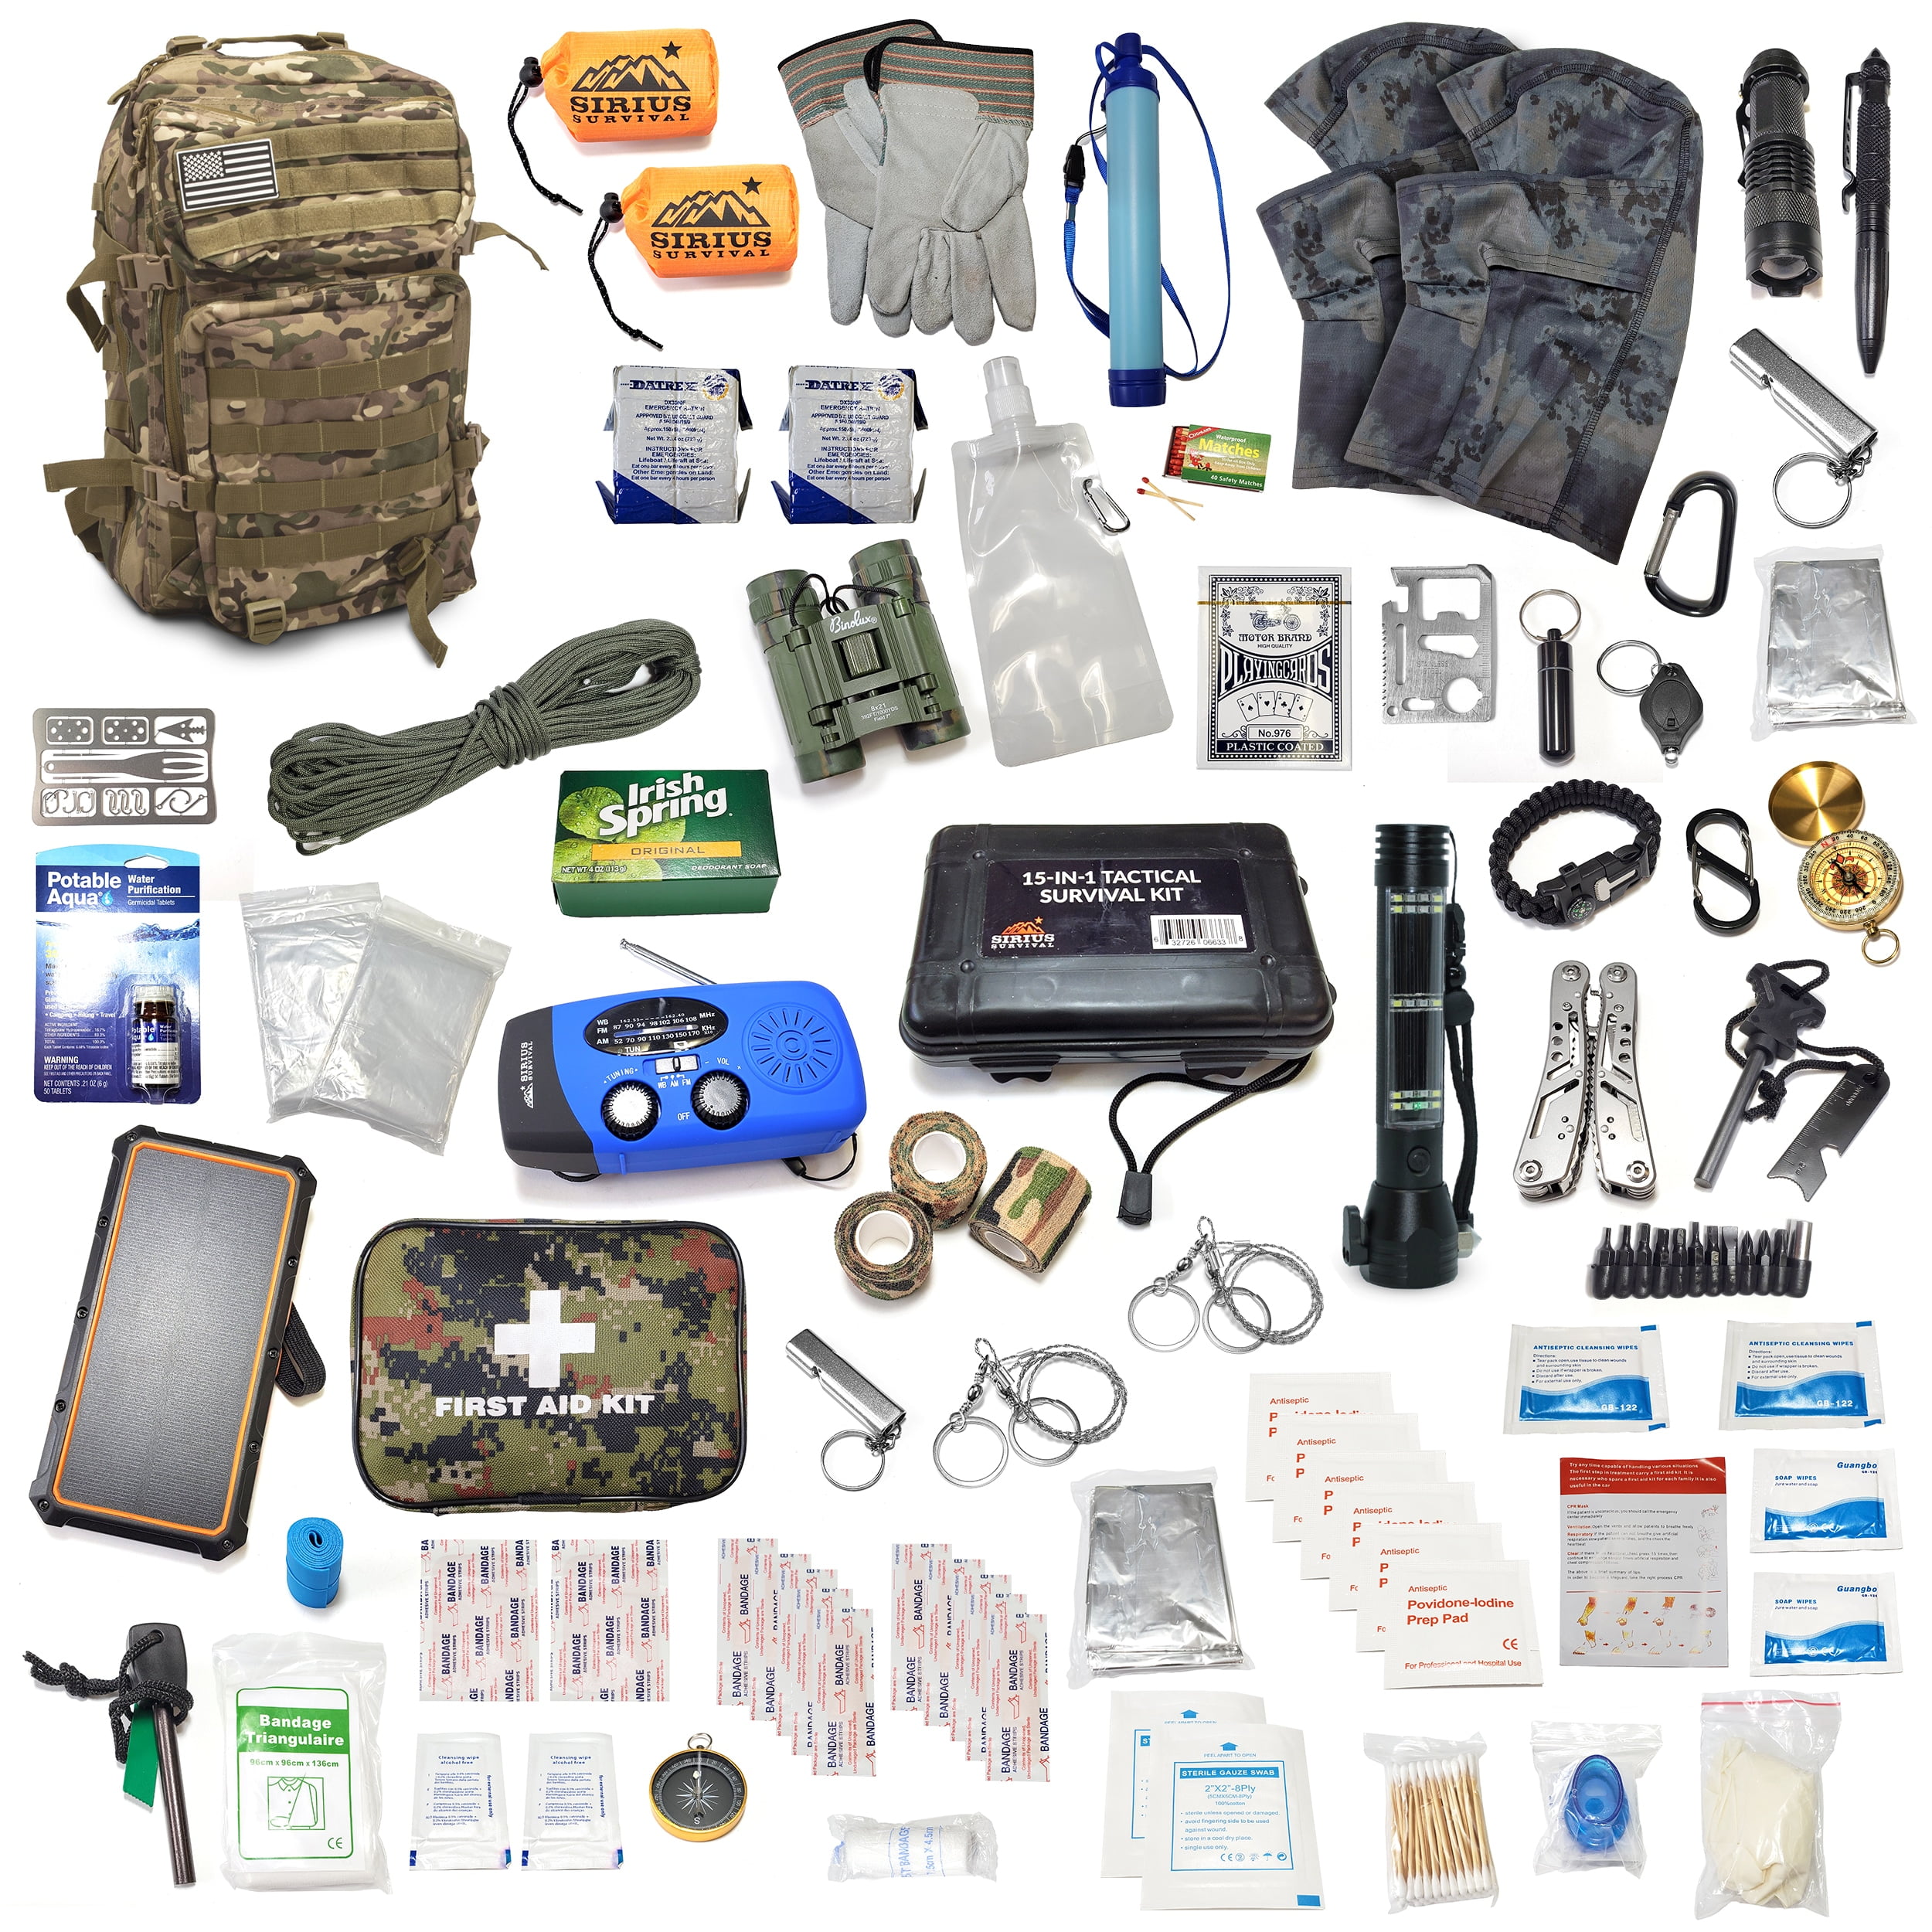 Pre-Packed Emergency Survival Kit/Bug Out Bag for 2 - Over 175 Total Pieces of Disaster Preparedness Supplies for Hurricanes, Floods, Earth Quakes 